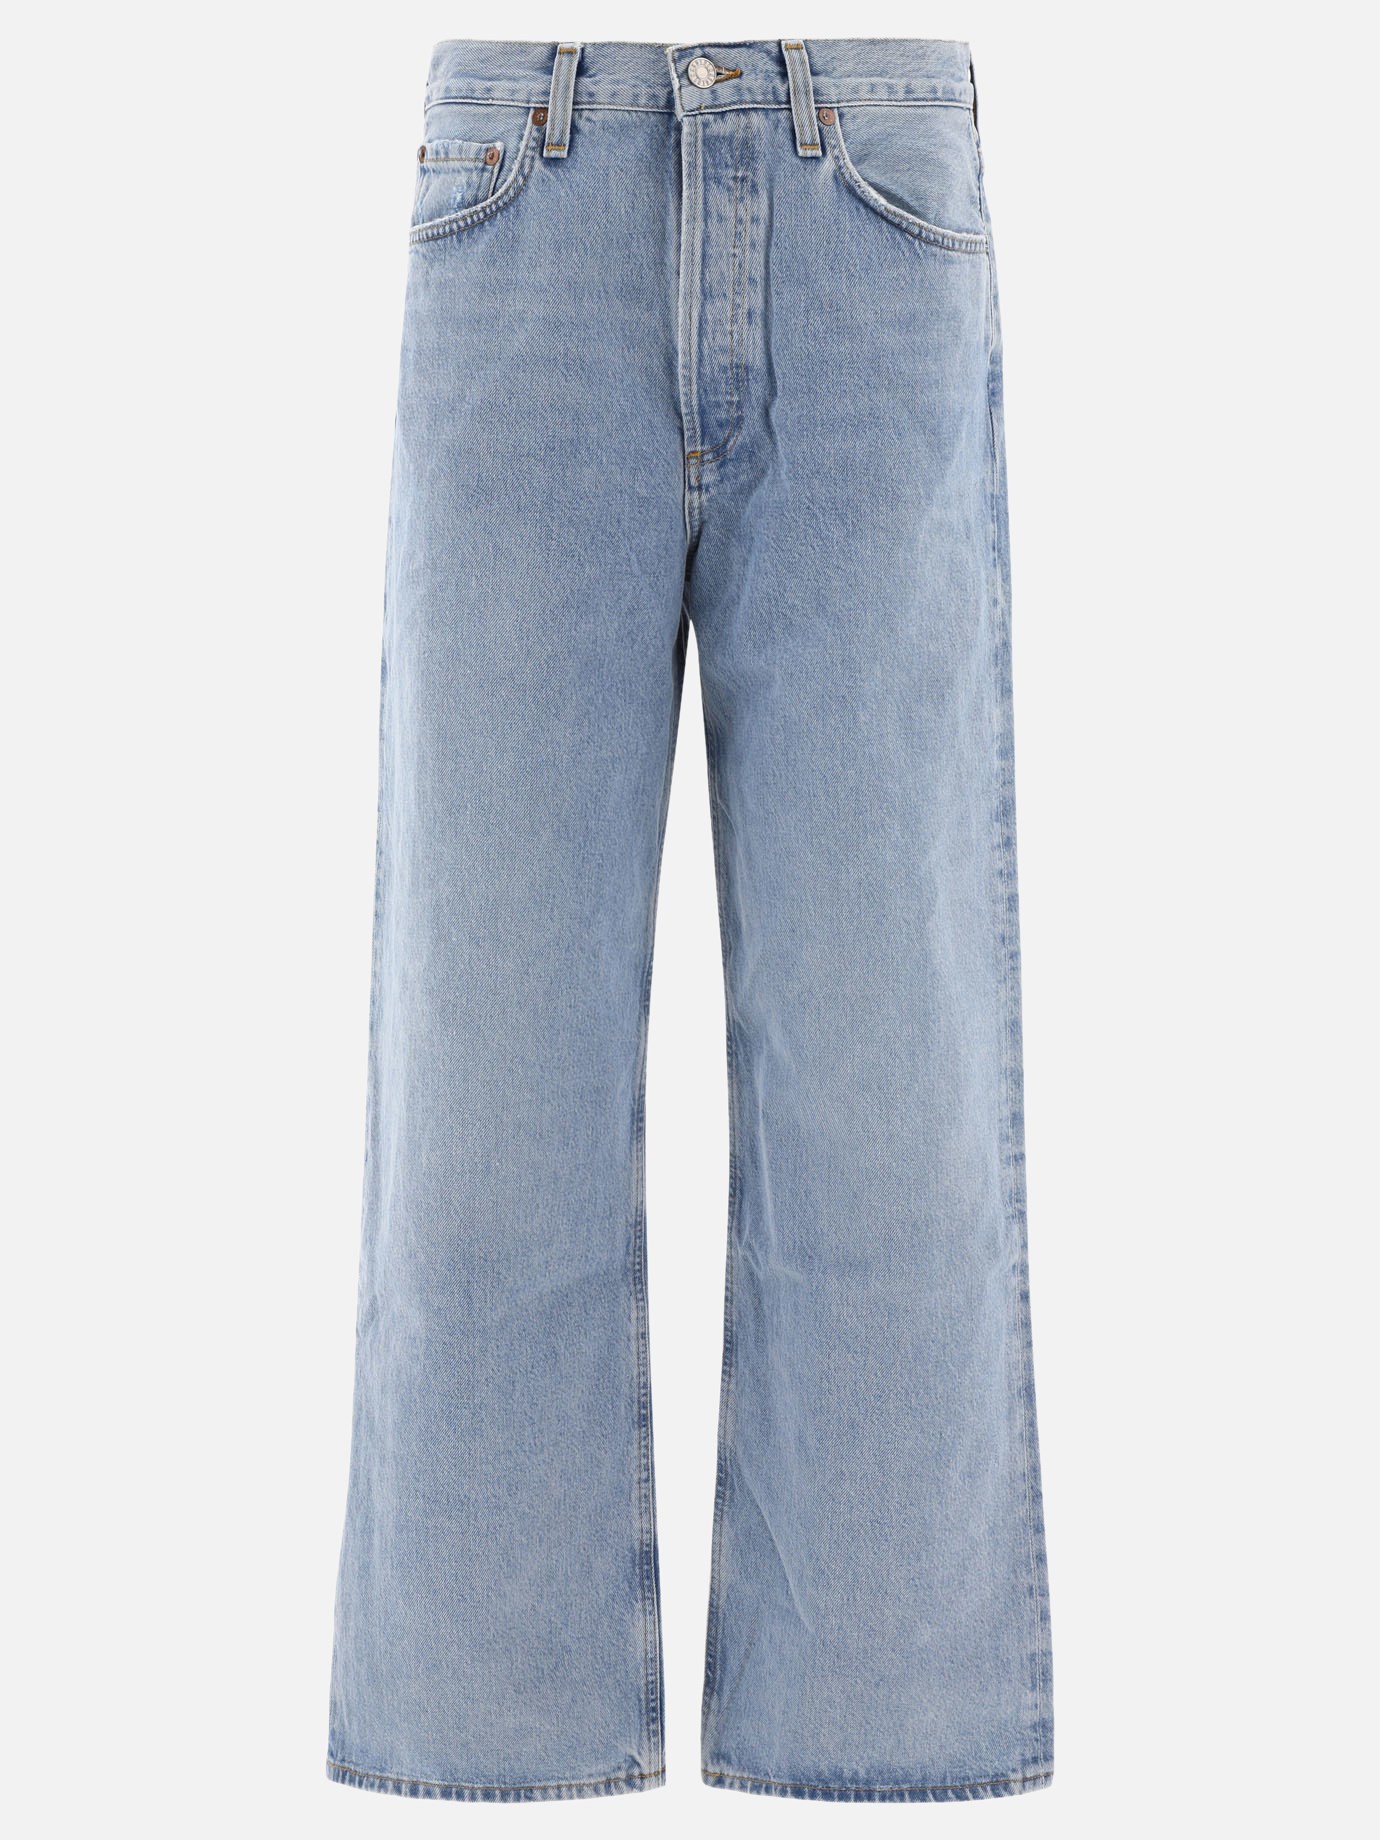  Low Rise Baggy  jeansby Agolde - 3